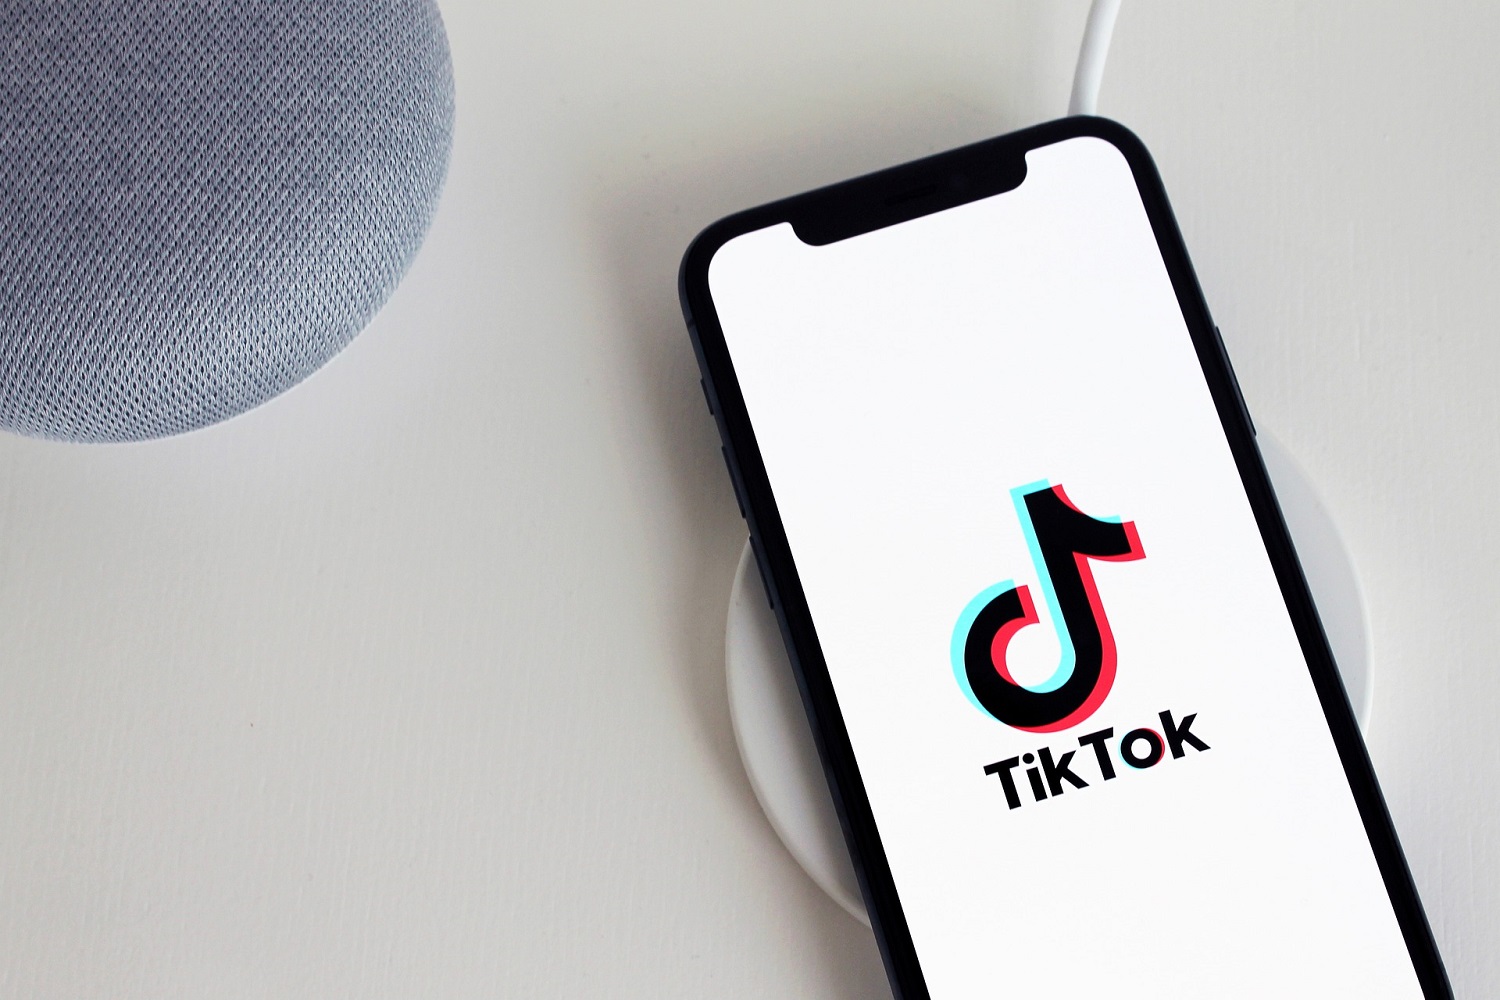 Tagged by strangers on TikTok? Here's how to untag yourself